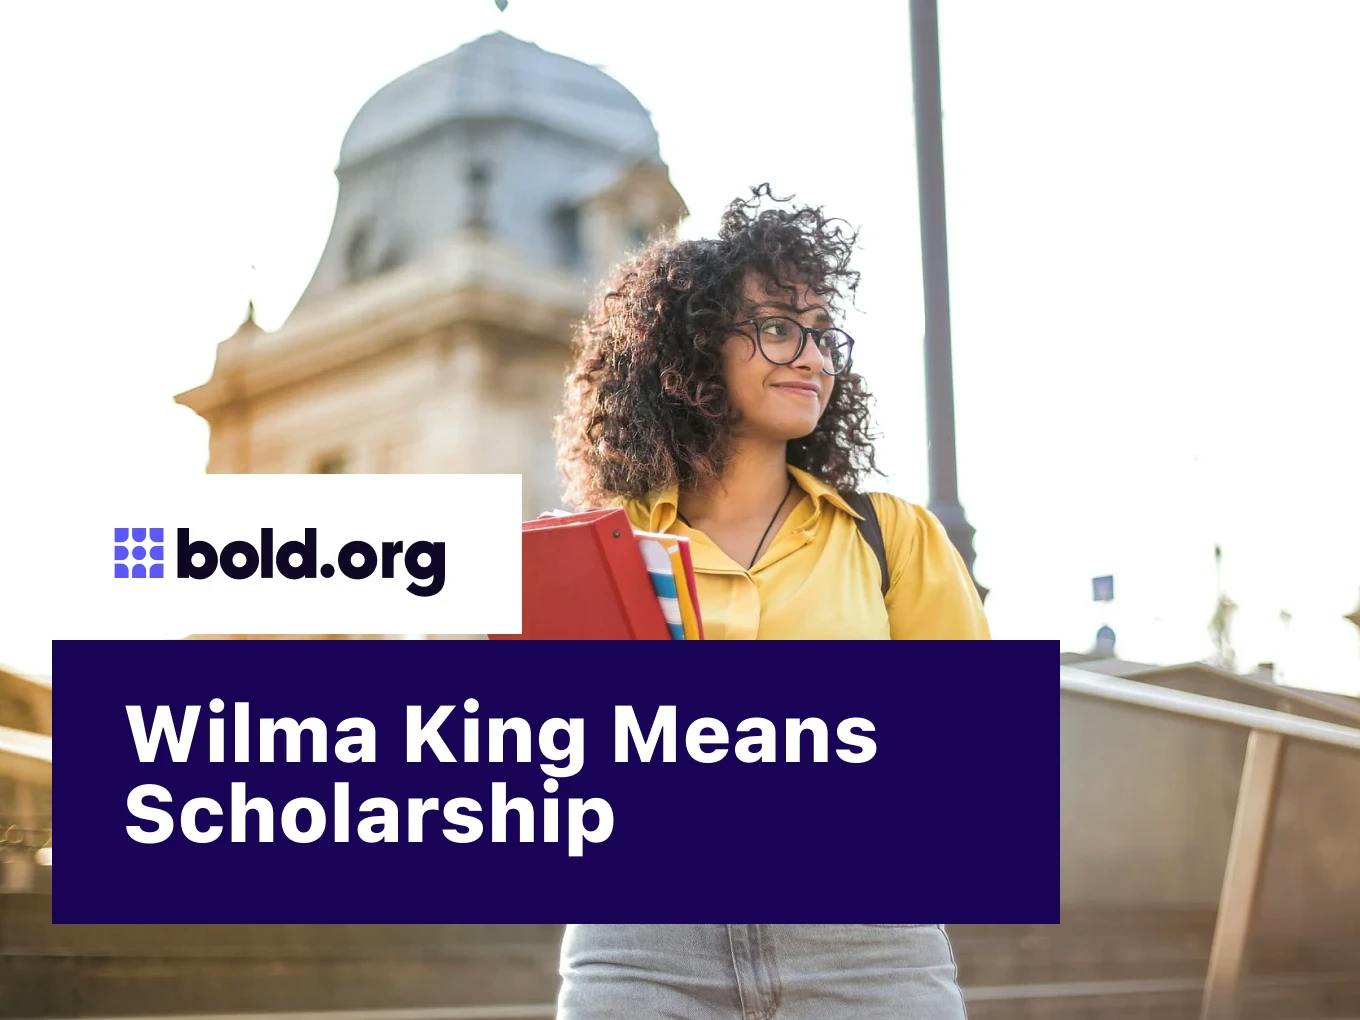 Wilma King Means Scholarship